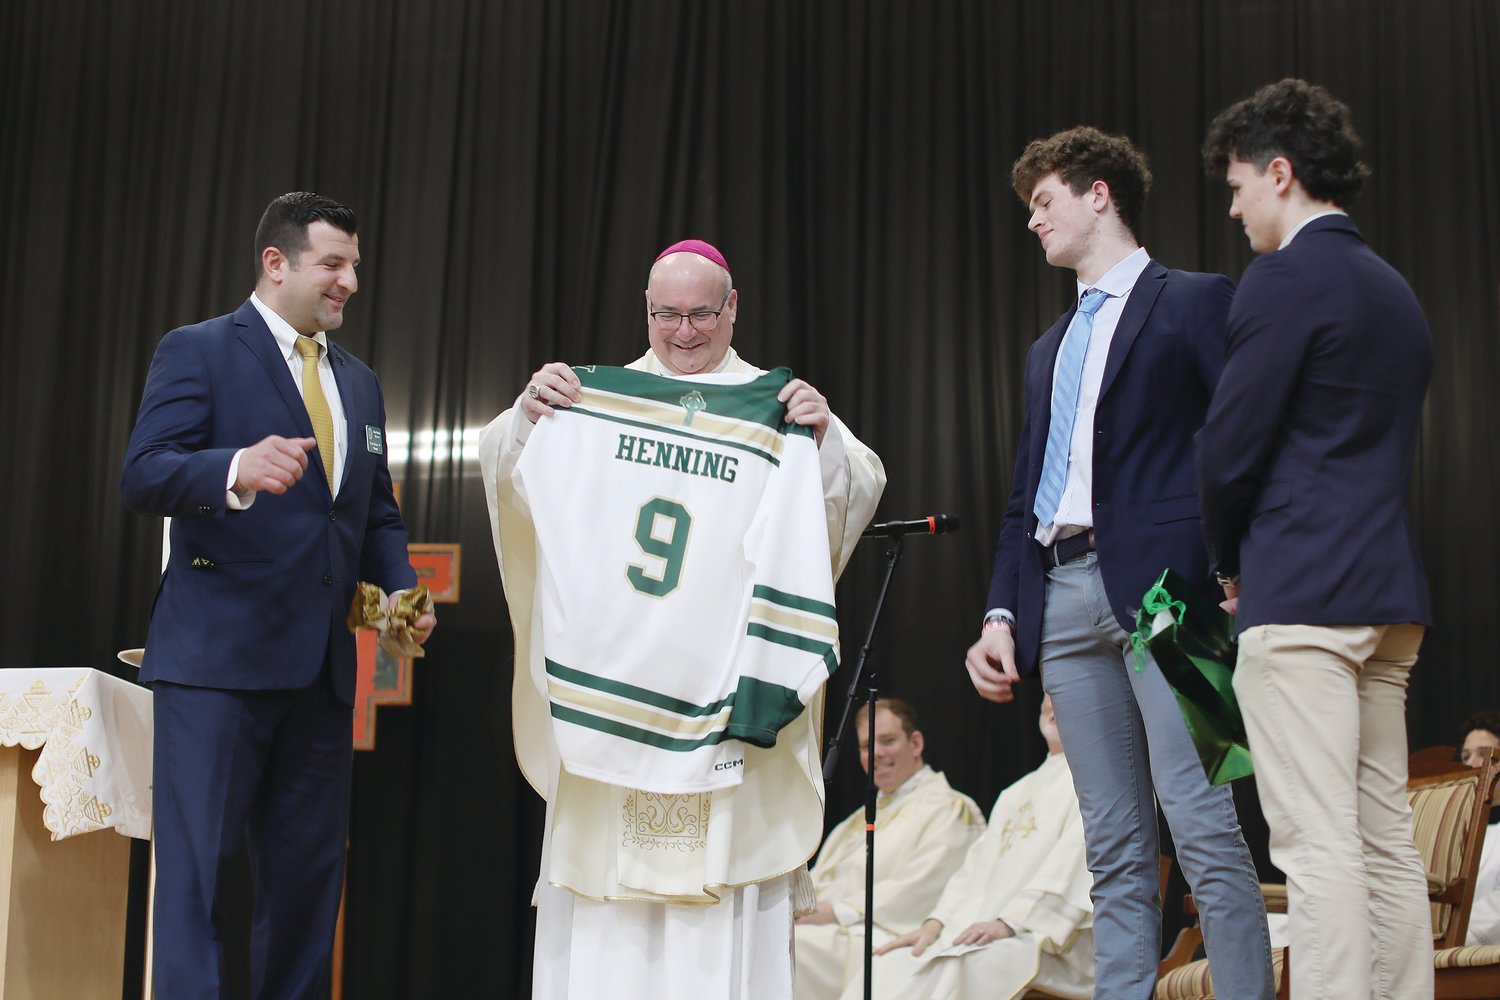 Coadjutor Bishop Richard G. Henning visits Bishop Hendricken High School on Friday, March 3. Pictured: Heis presented with a school jersey by Principal Mark DeCiccio ‘03, and student athletes Alexander Clemmey ‘23 and Steven Nardelli ‘23.